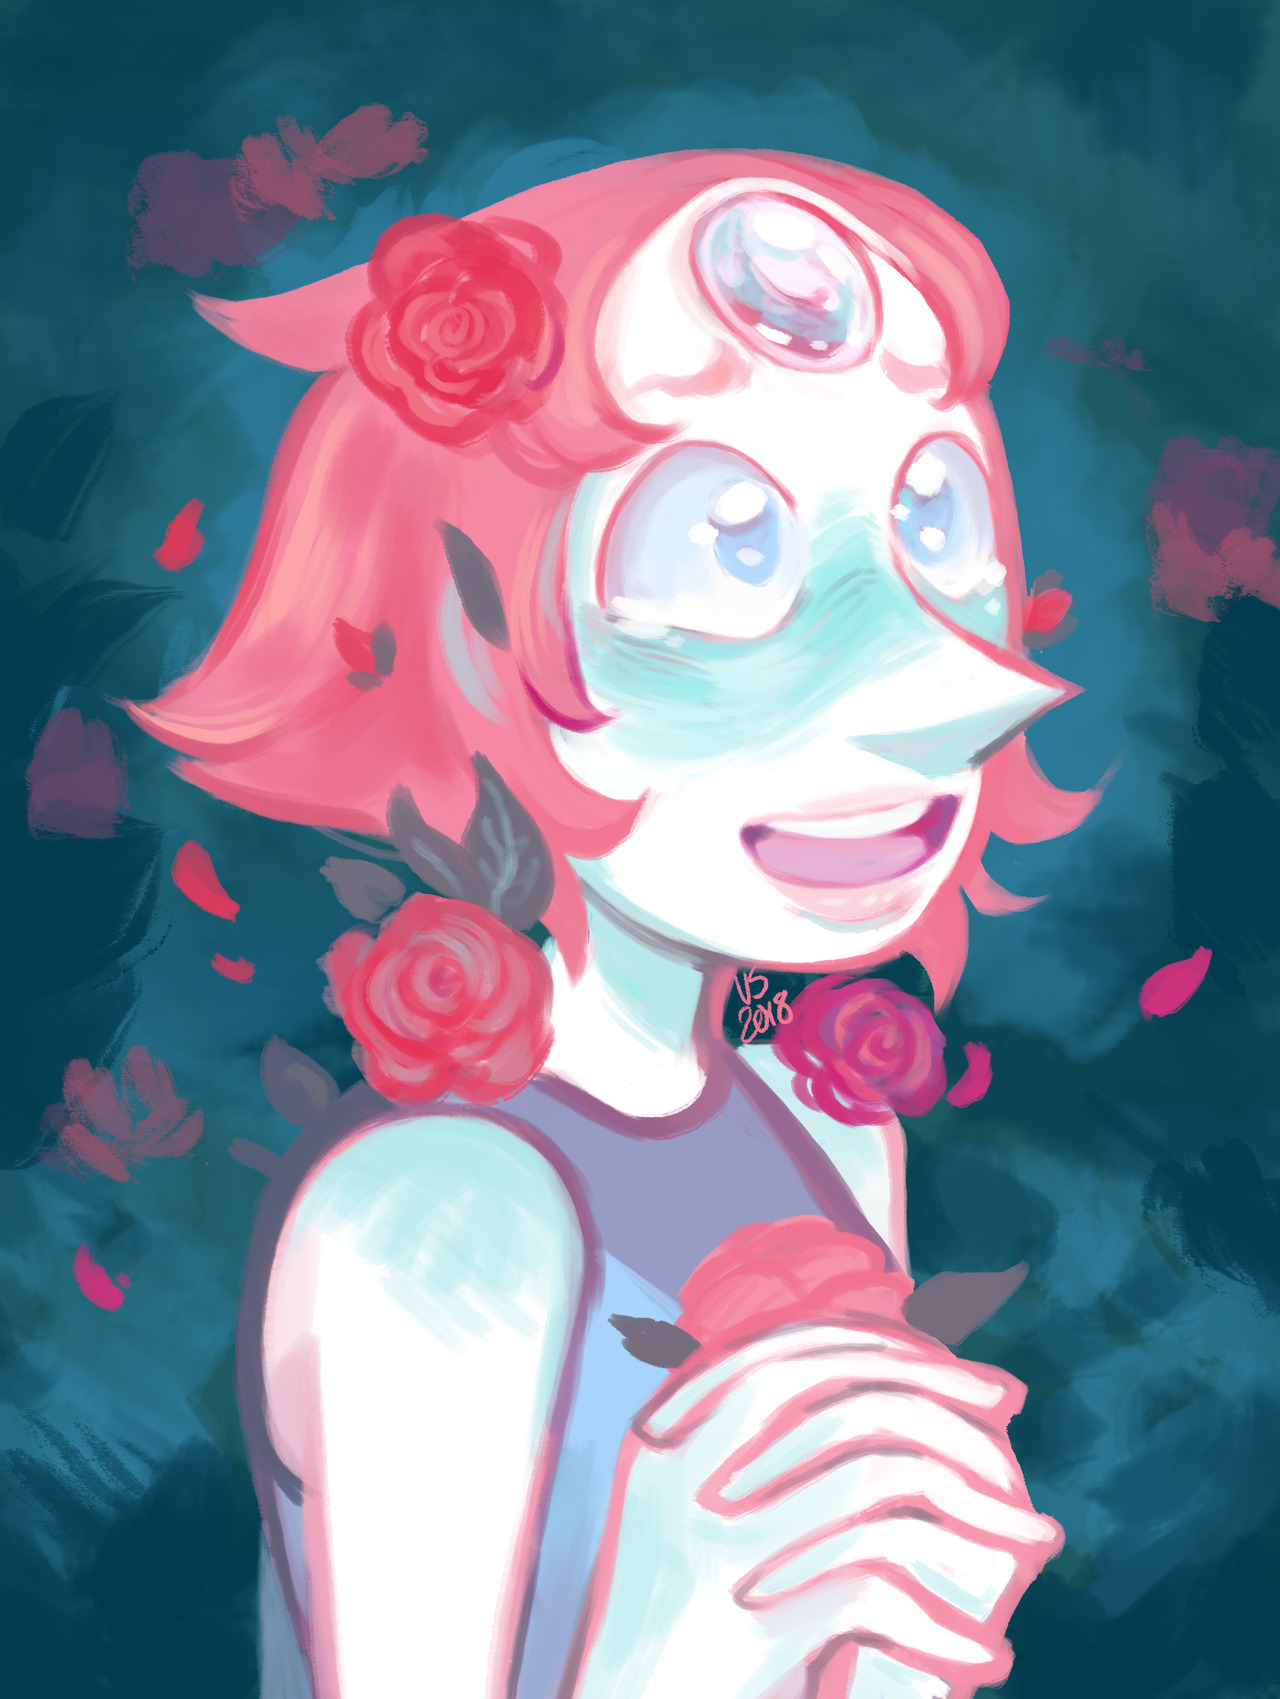 ““I’ve been…imagining things." ” A quick warm up that somehow snowballed into a quick-ish painting. I haven’t drawn Pearl in quite awhile–